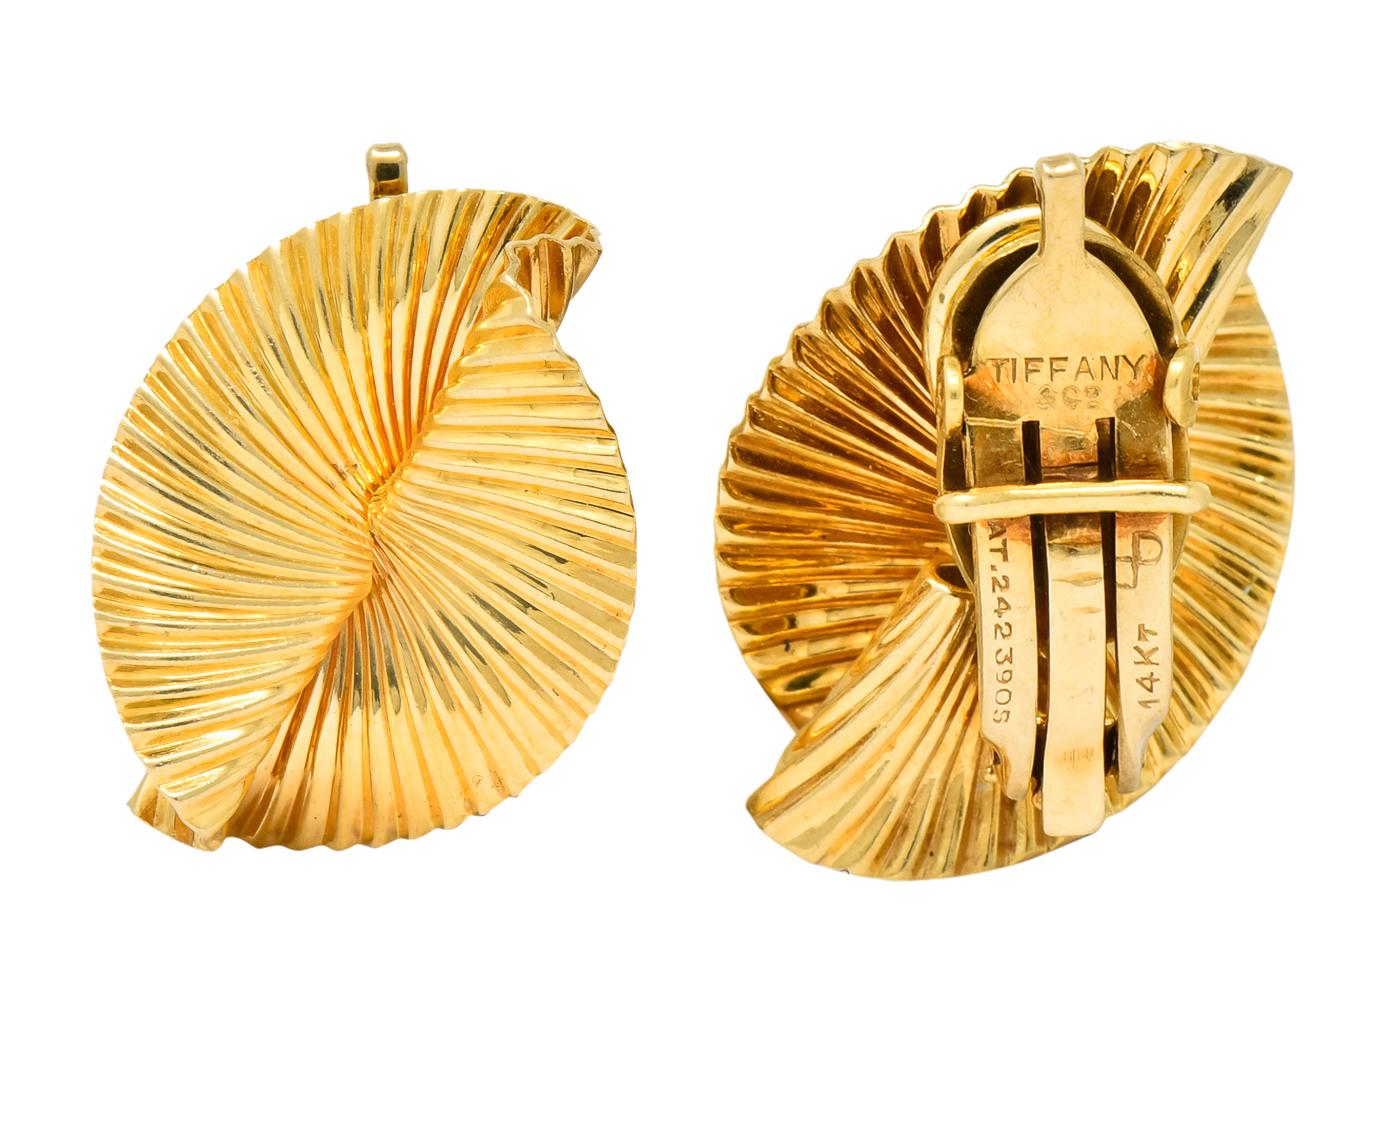 Each designed as a torqued foliate motif

With a polished ribbed texture

Completed by hinged ear clip-backs

Fully signed Tiffany & Co. and stamped 14KT for 14 karat gold

Circa 1950's

Measures: 7/8 x 11/16 inch

Total weight: 9.0 grams

Dynamic.